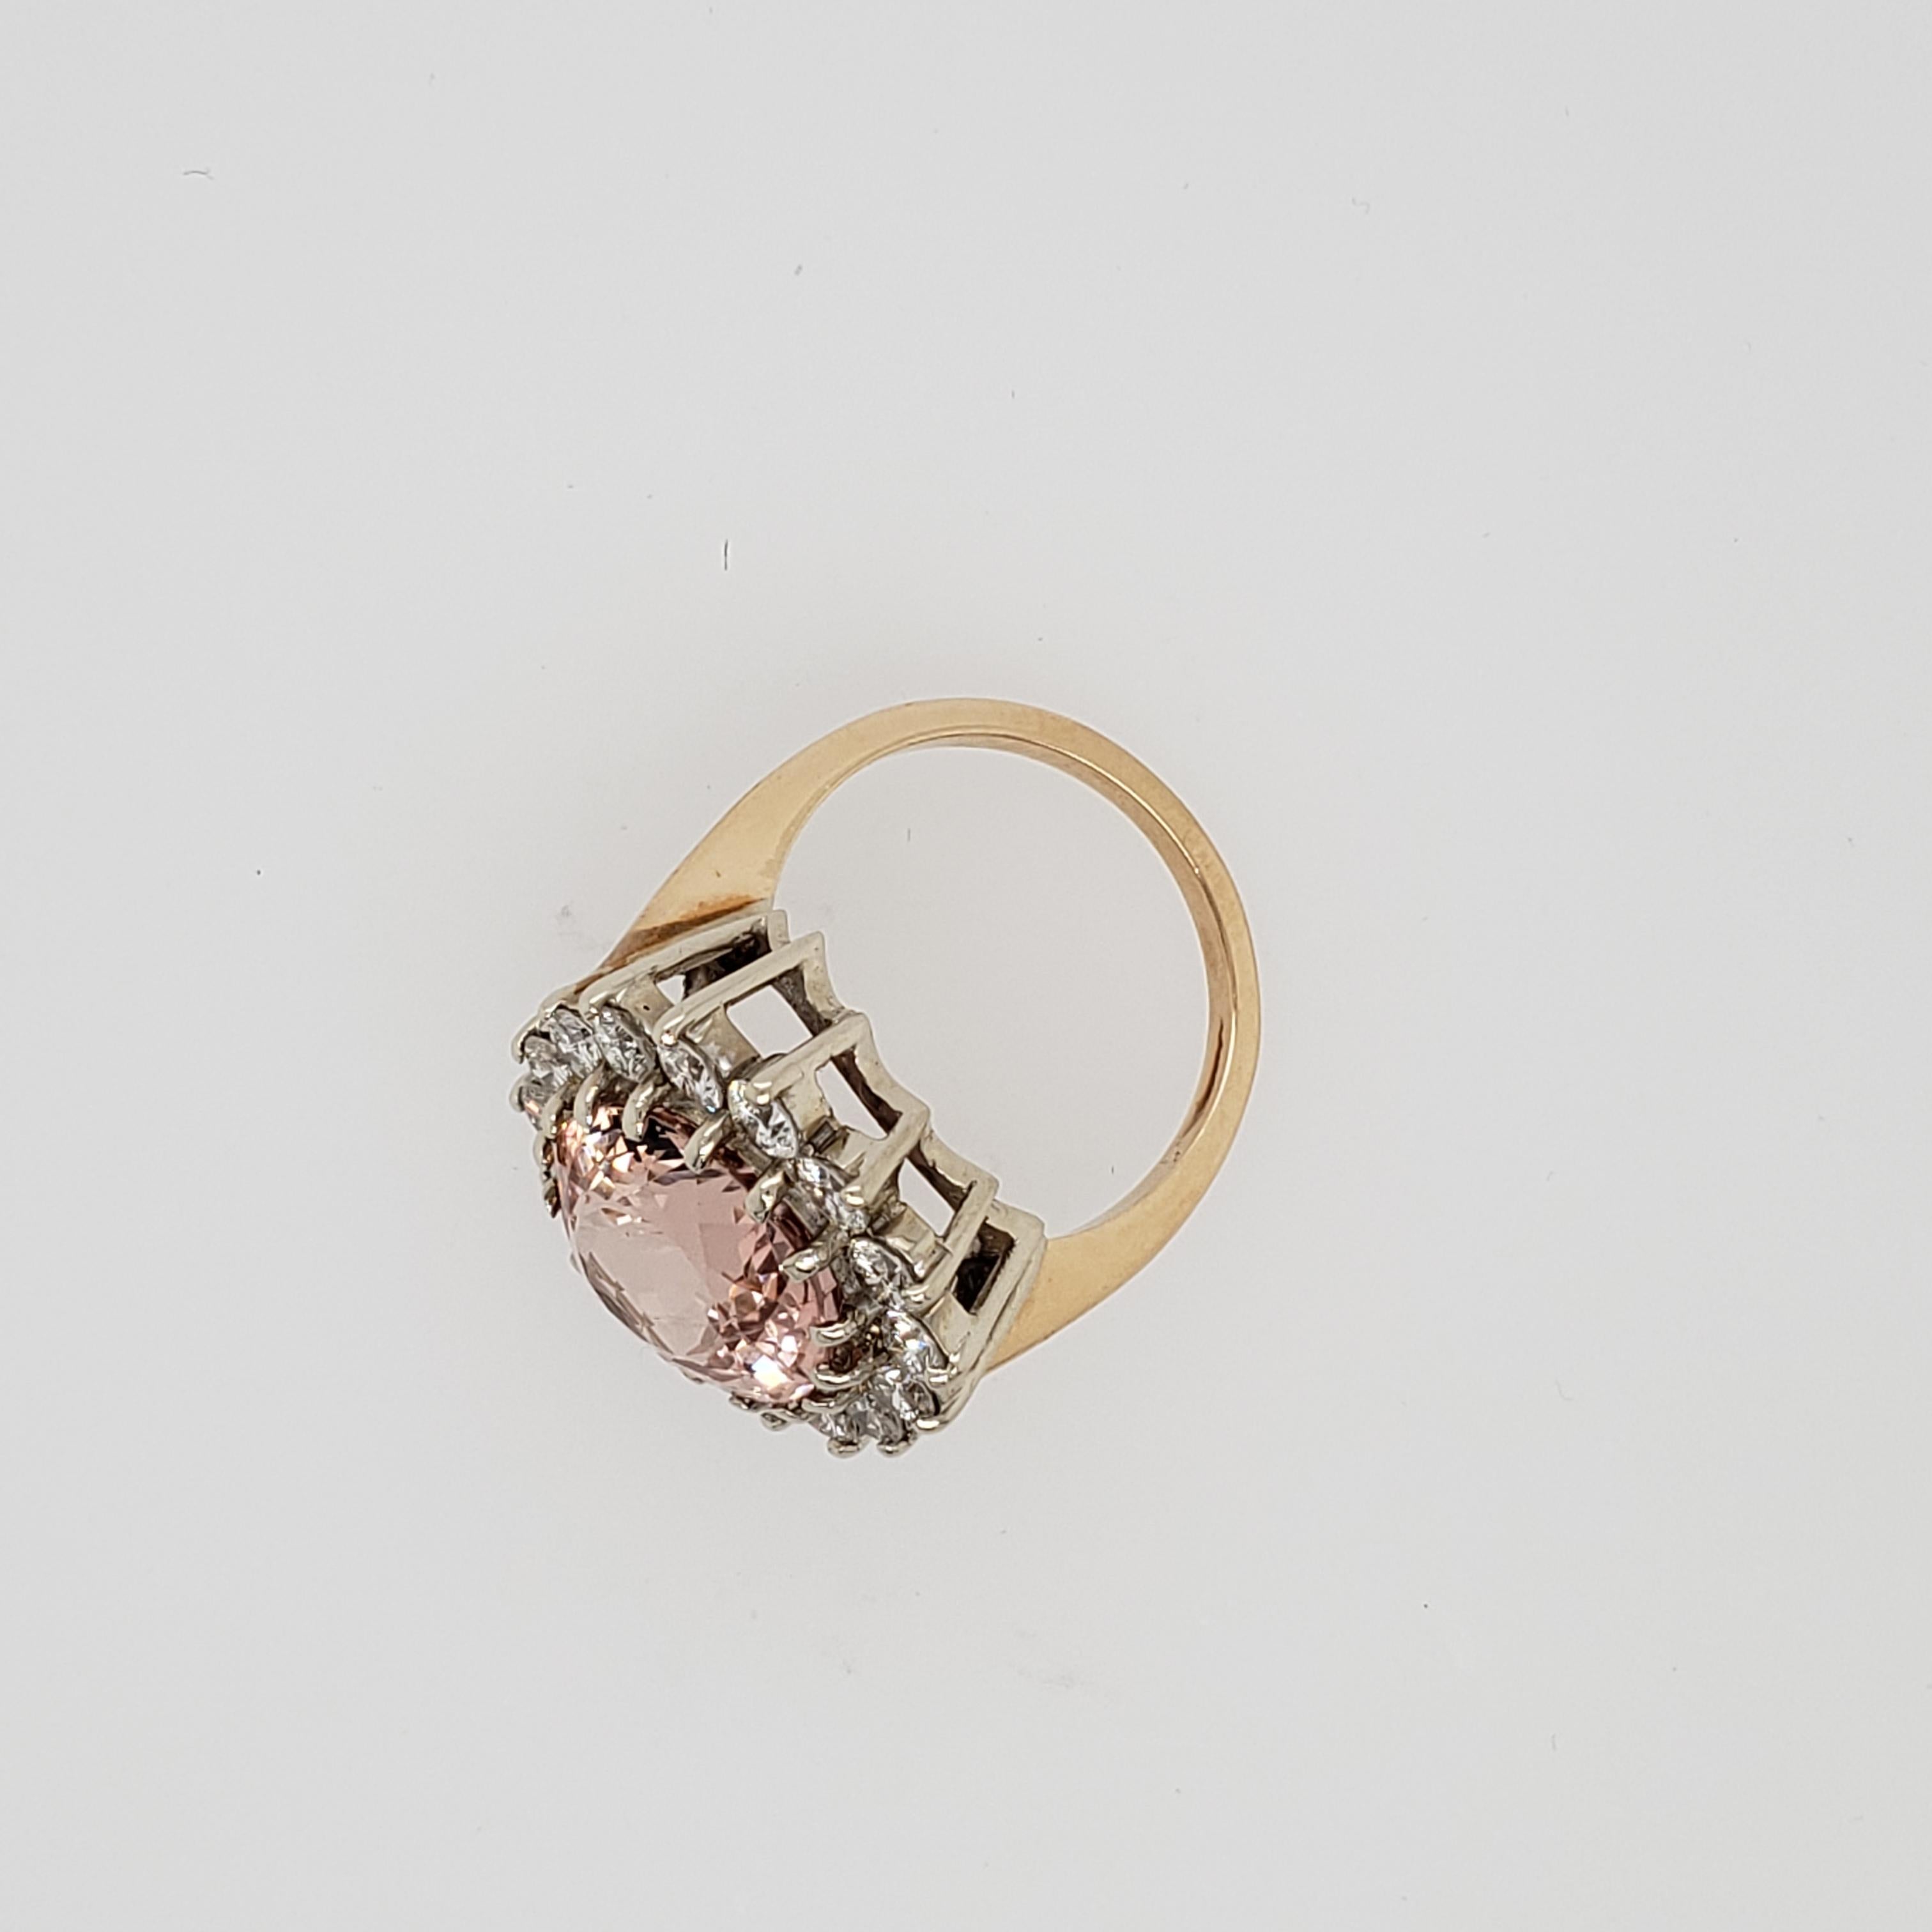 A 14 karat yellow and white gold Morganite and Diamond ring. The oval Morganite weighing 7.91 carats and accented by a halo of 16 round diamonds weighing 1.92 carats. The diamonds are G-H in color and SI in clarity. 

Size 6 and 3/4
14 Karat yellow